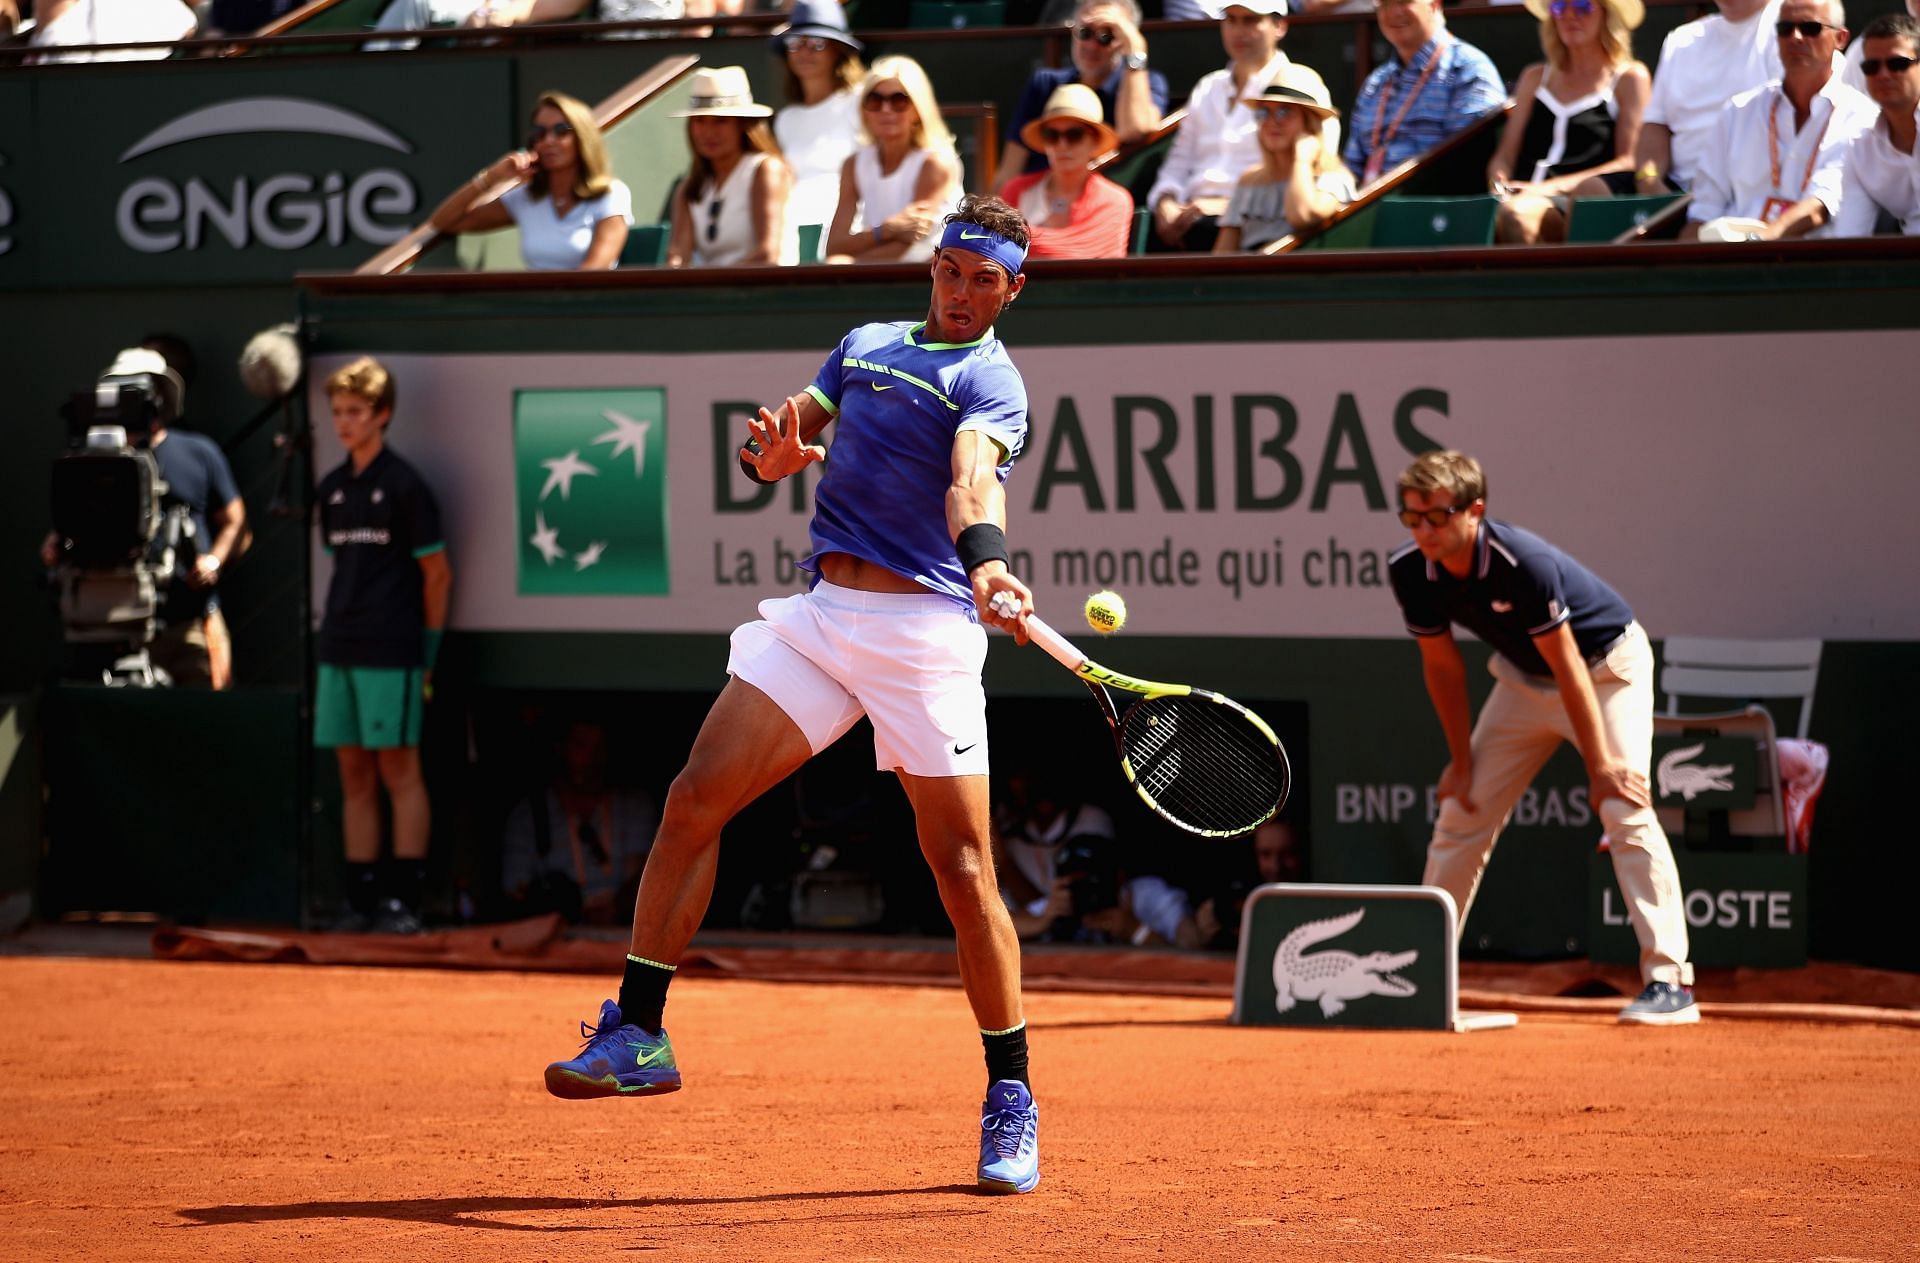 Rafael Nadal at the 2017 French Open